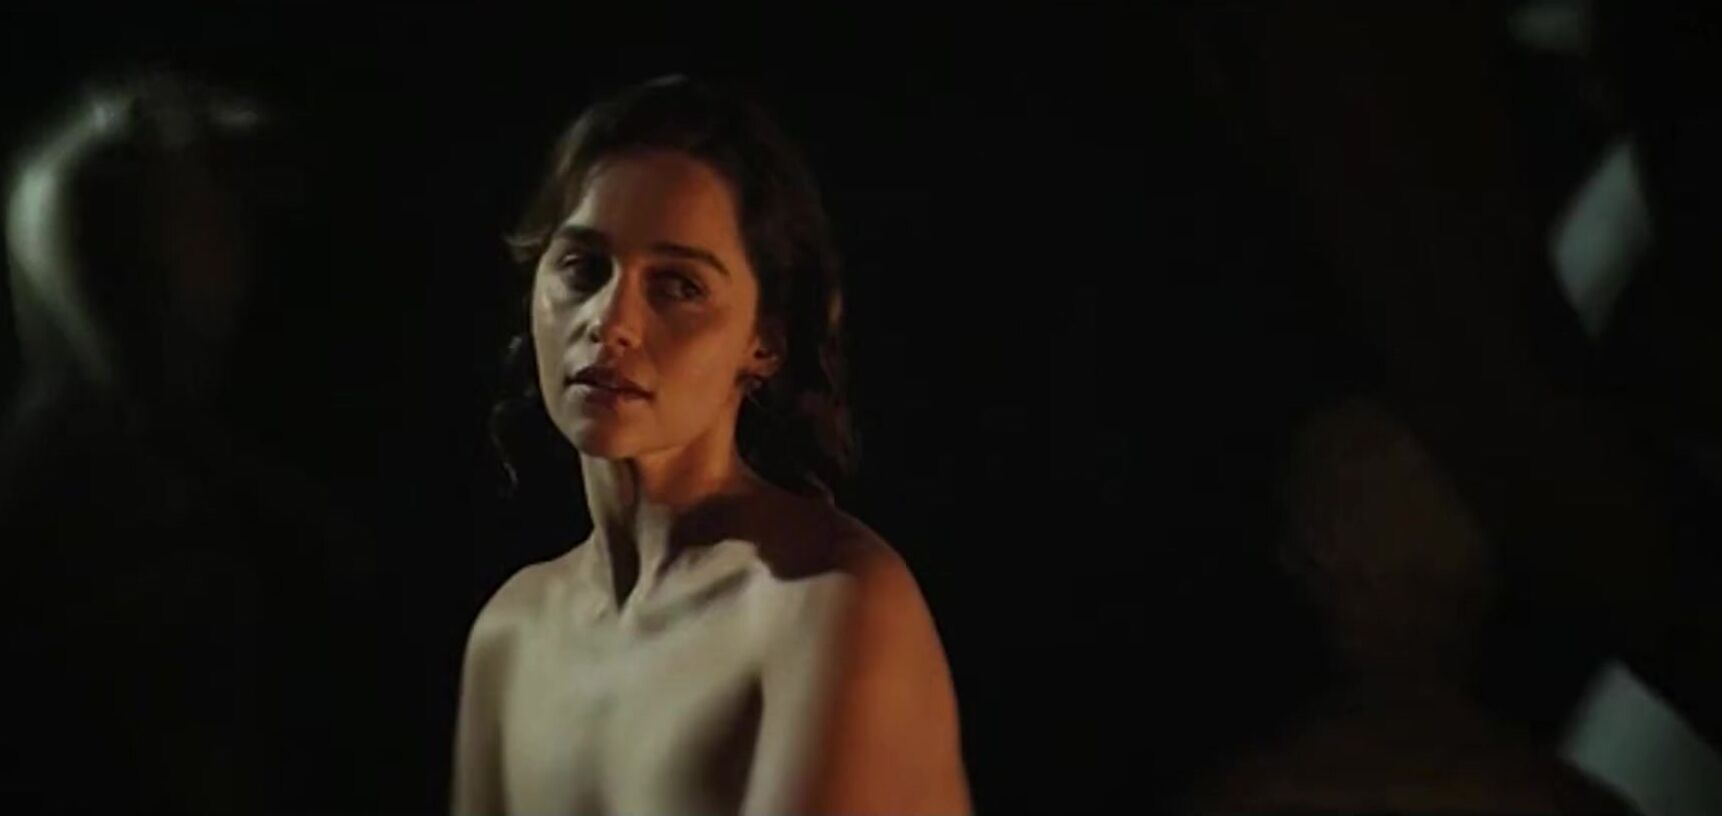 Ass Fetish Sometimes Emilia Clarke can't resist booty call and allows co-star to fool around TubeAss - 2